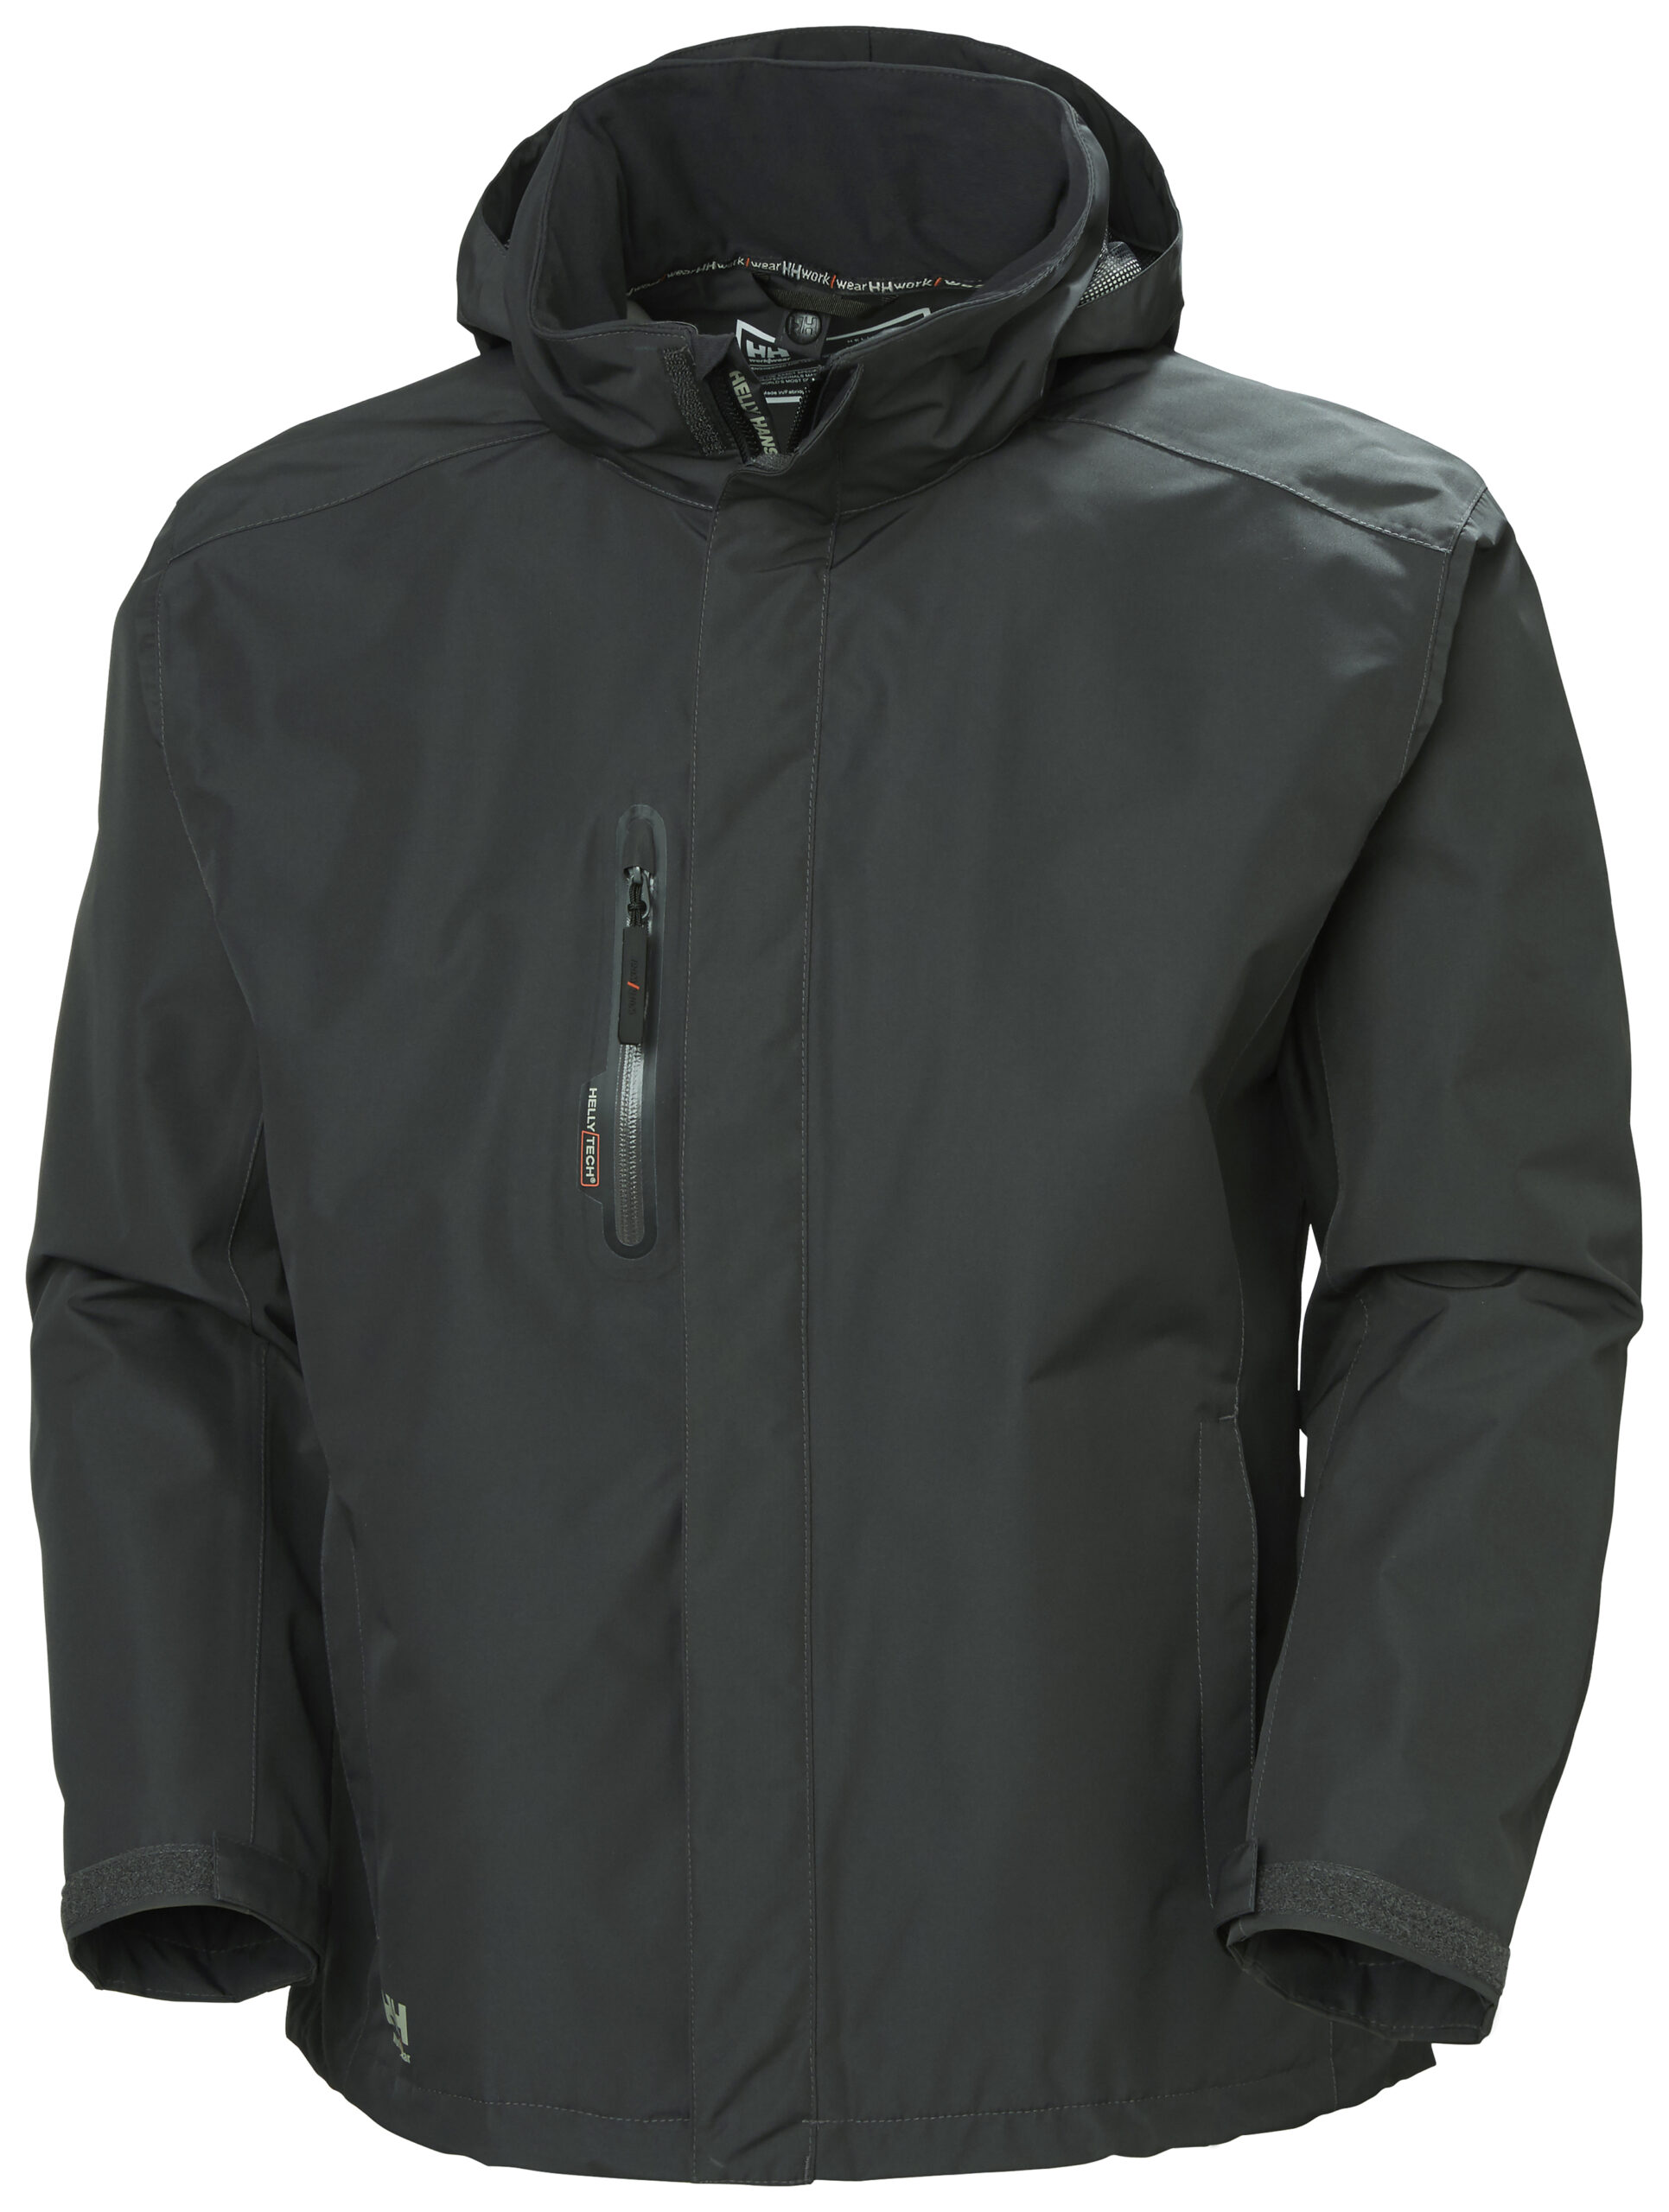 HELLY HANSEN MANCHESTER WATERPROOF SHELL JACKET - Access and Safety Store